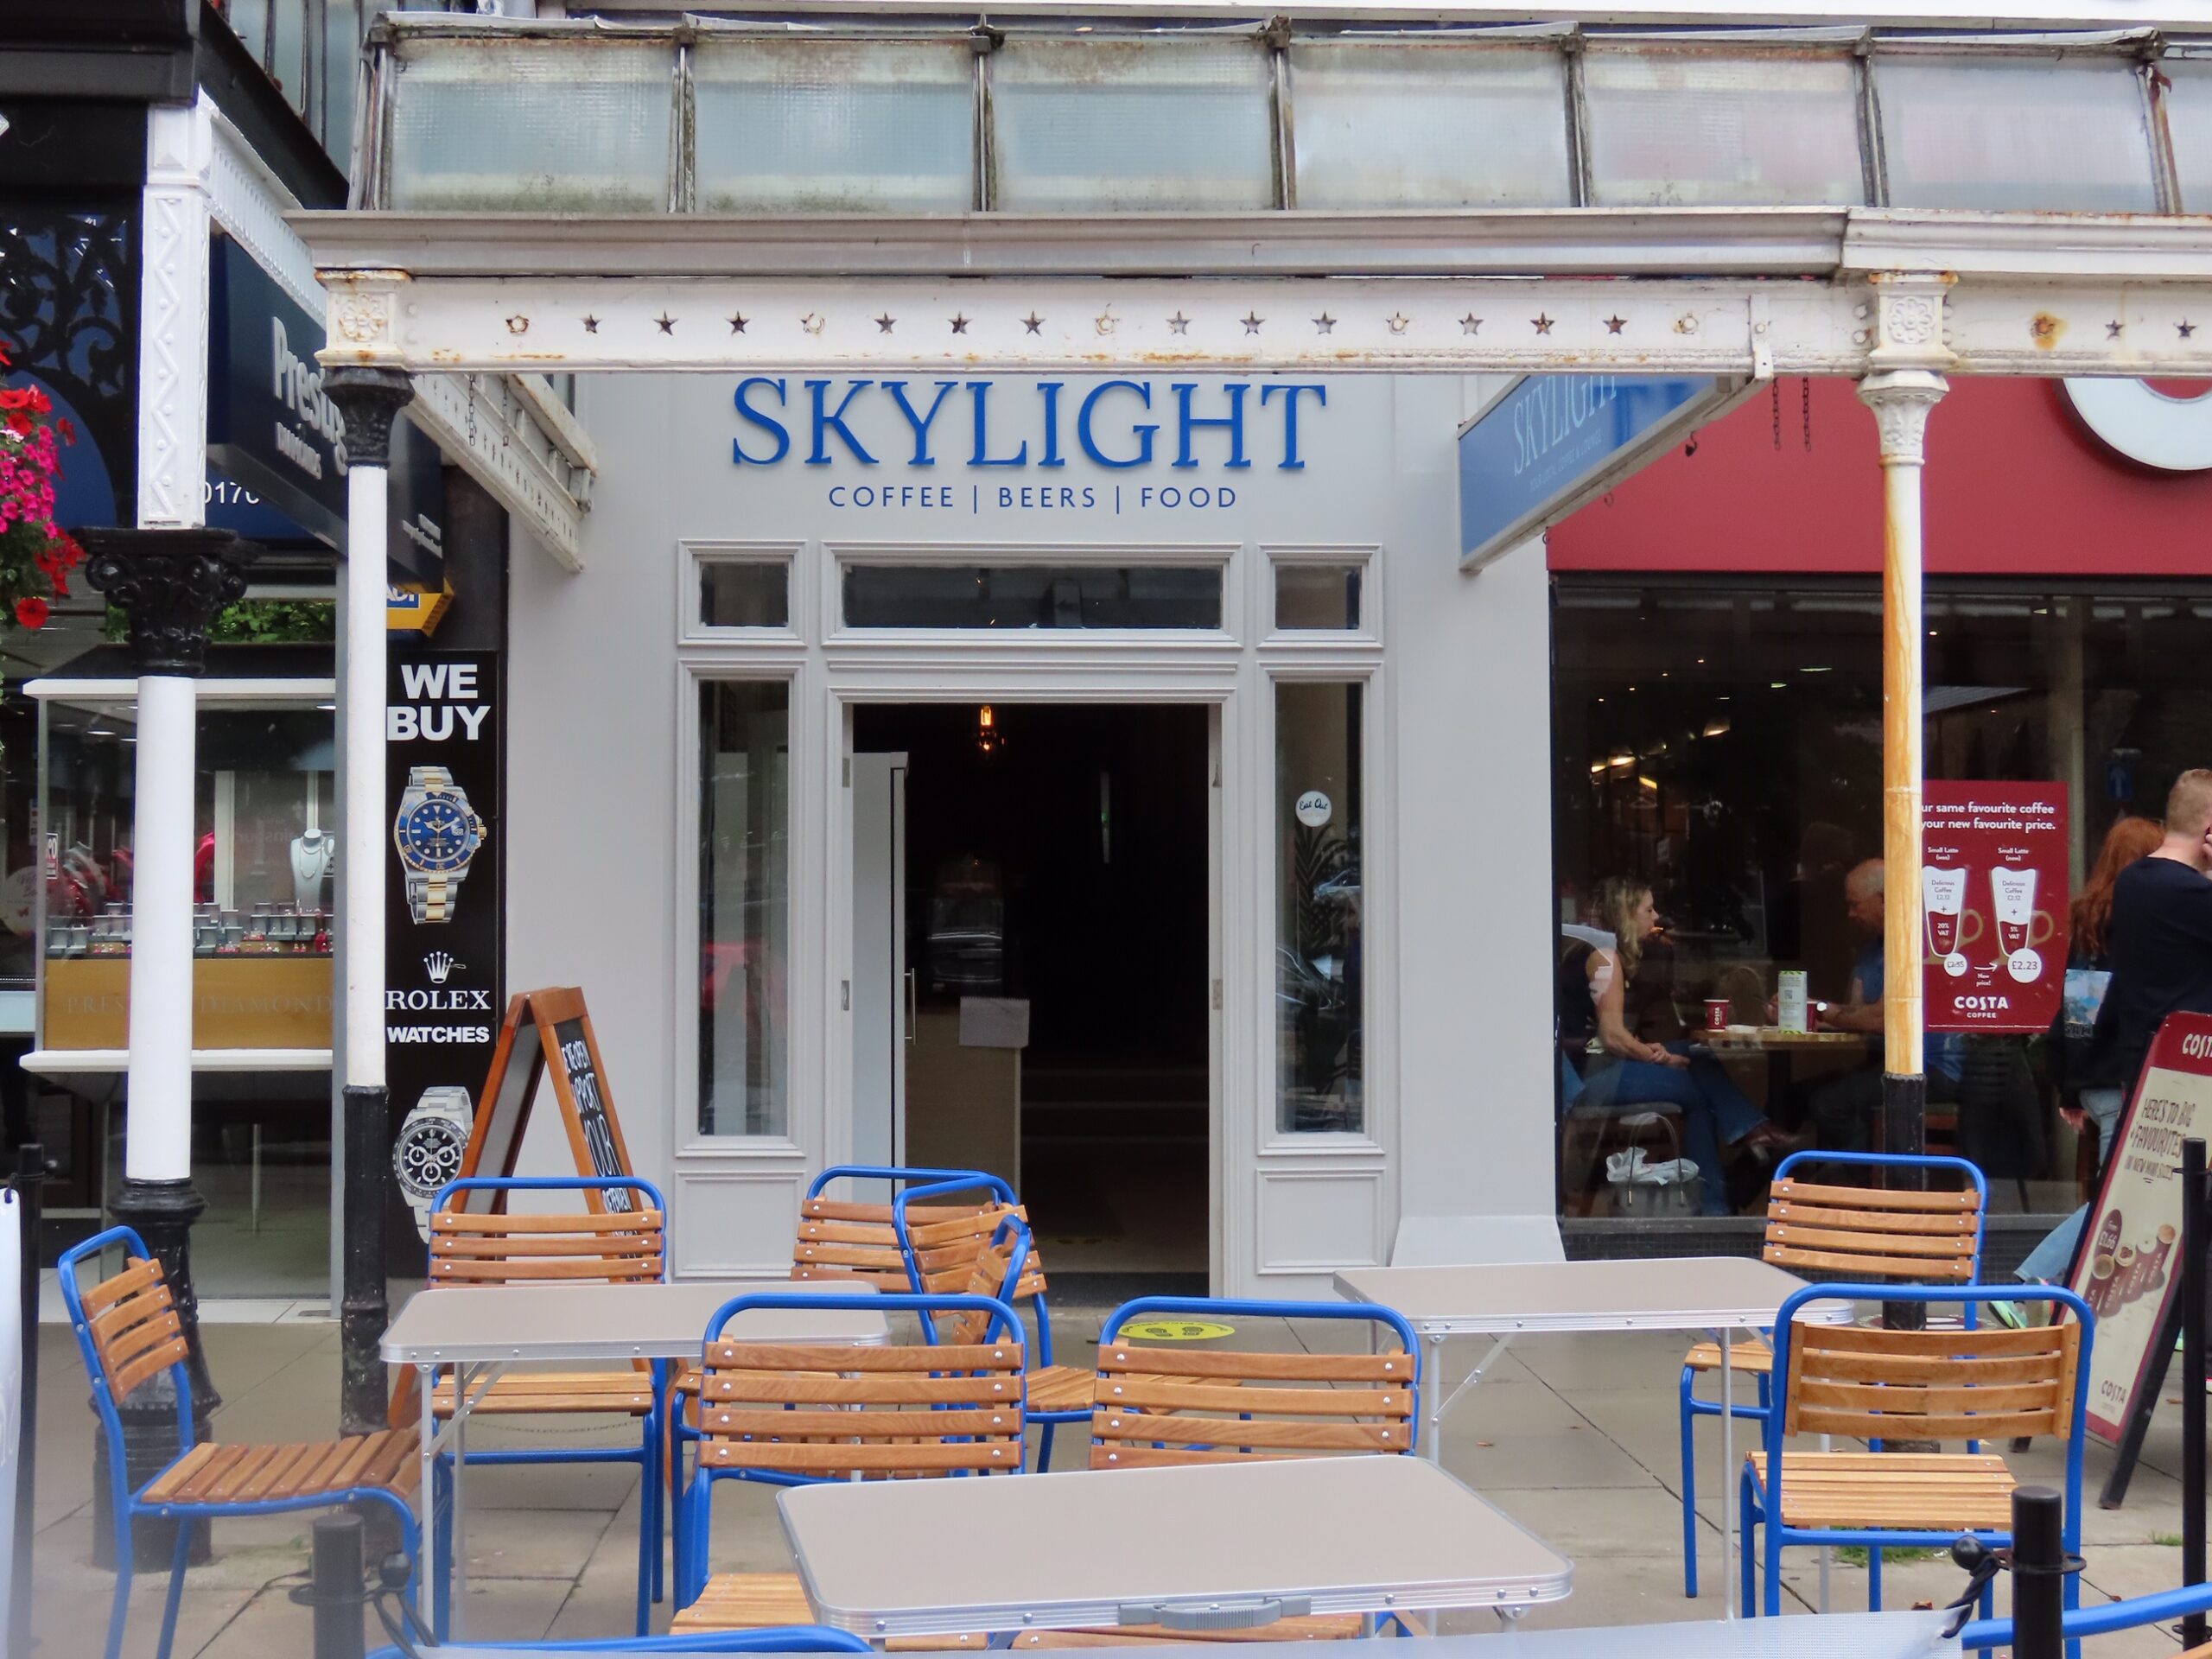 Skylight cafe and bar on Lord Street in Southport. Photo by Andrew Brown Media